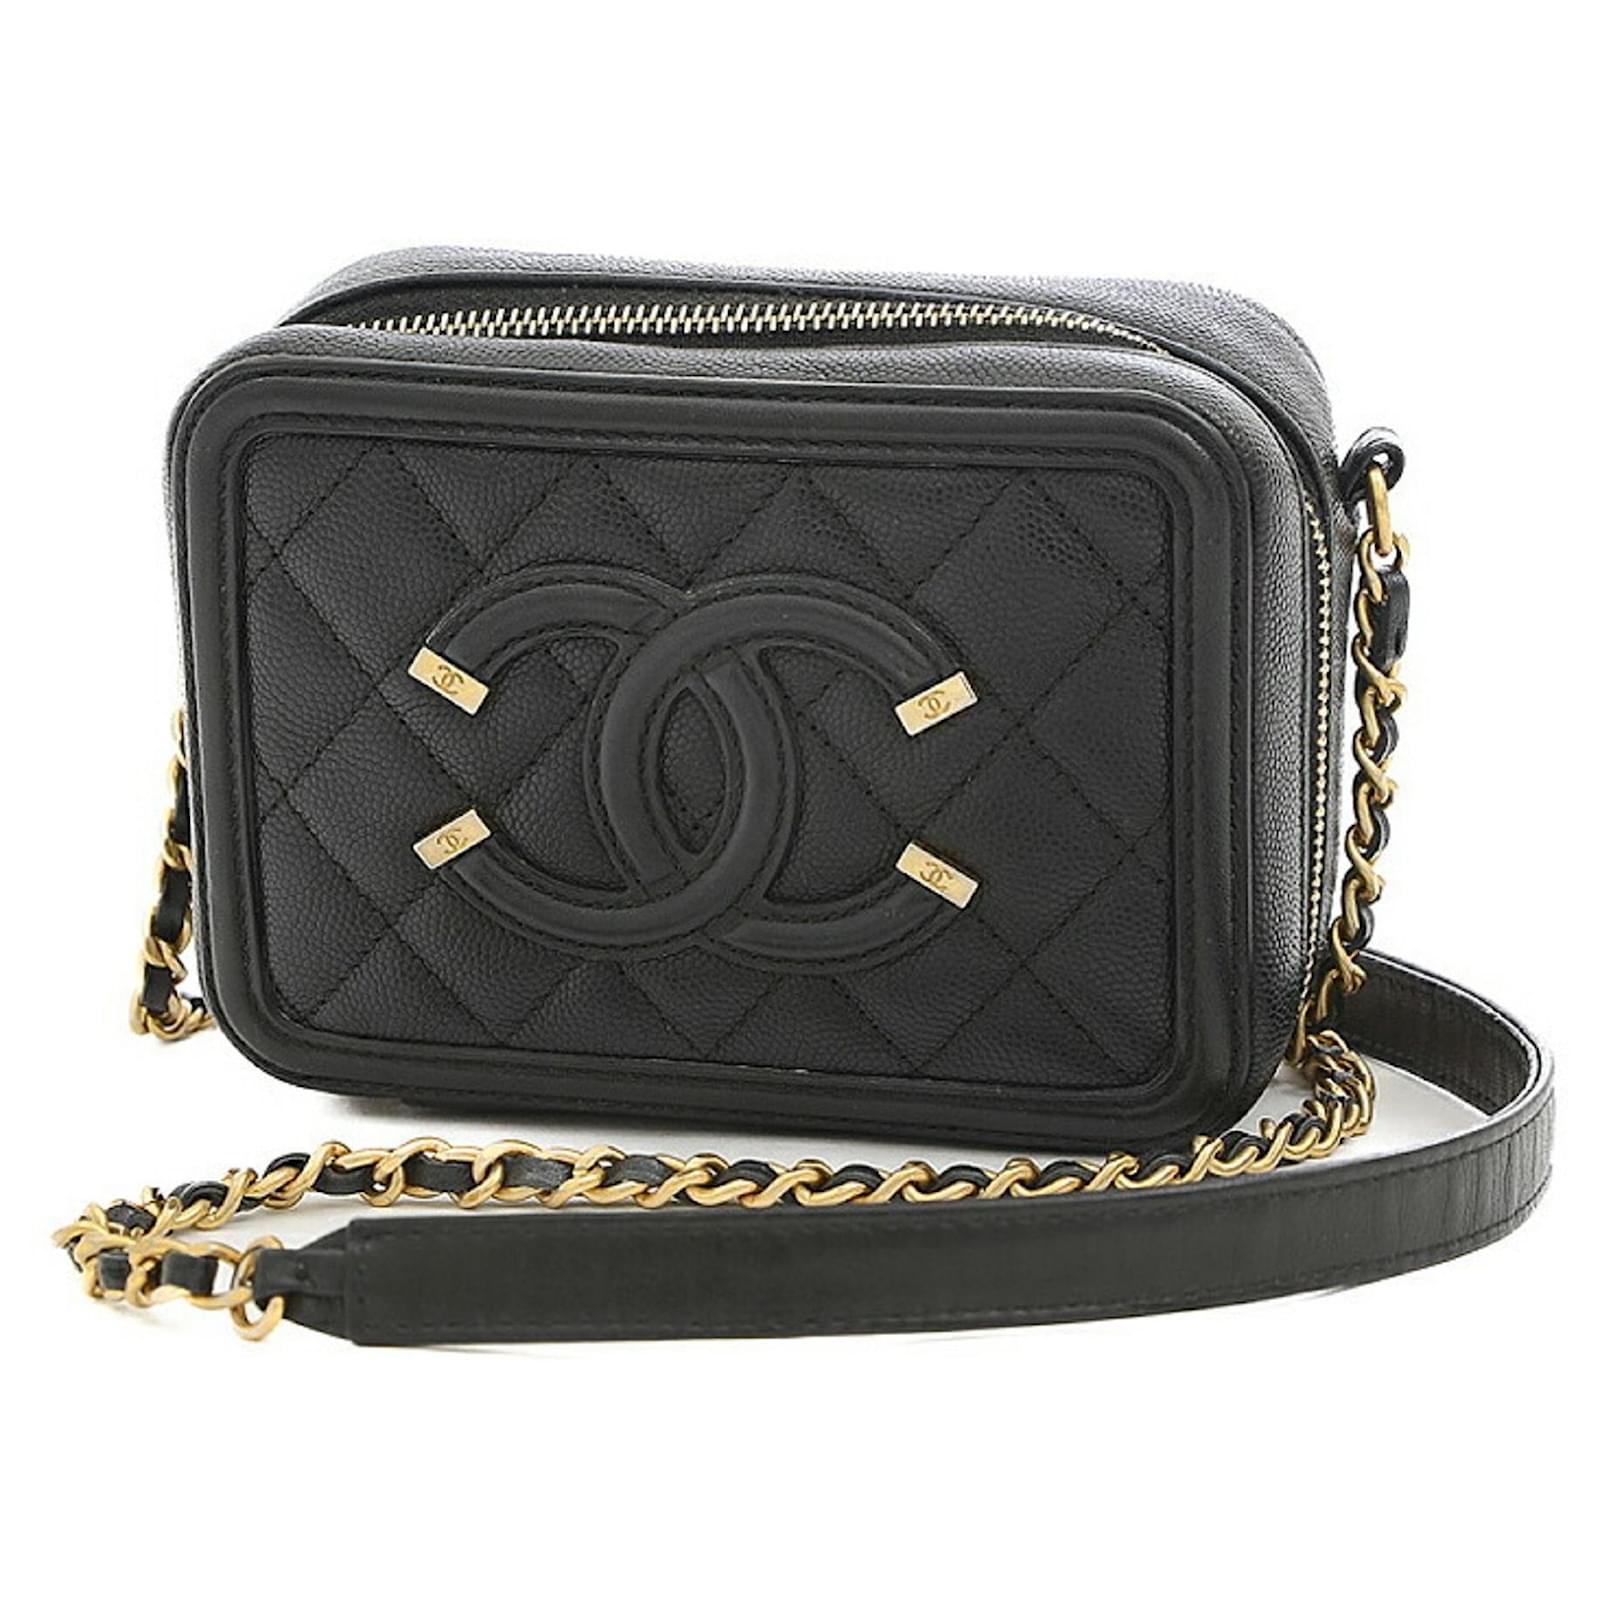 Clutch Bags Chanel Chanel Vanity Cosmetic Pouch Caviar Skin Black CC Auth bs2949a